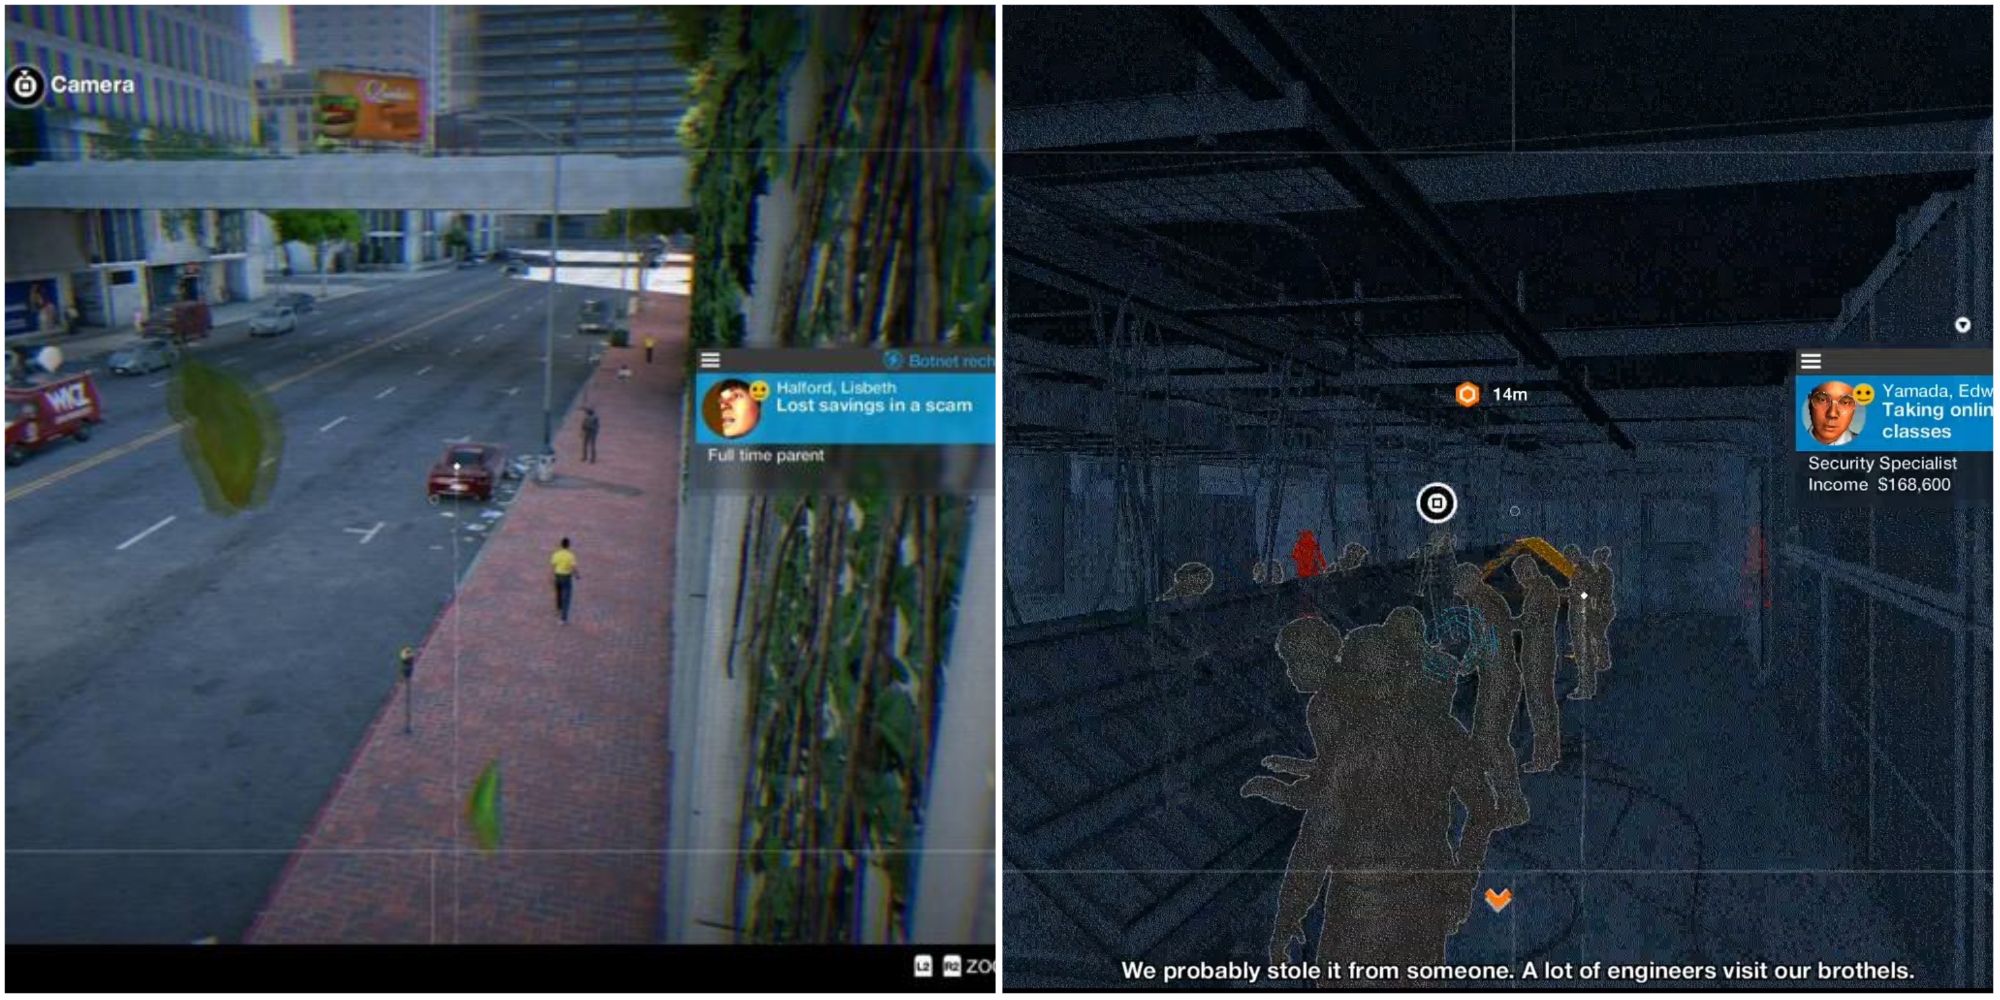 Collage of a hacked cameras outside on the street and in an enemy base in Watch Dogs 2